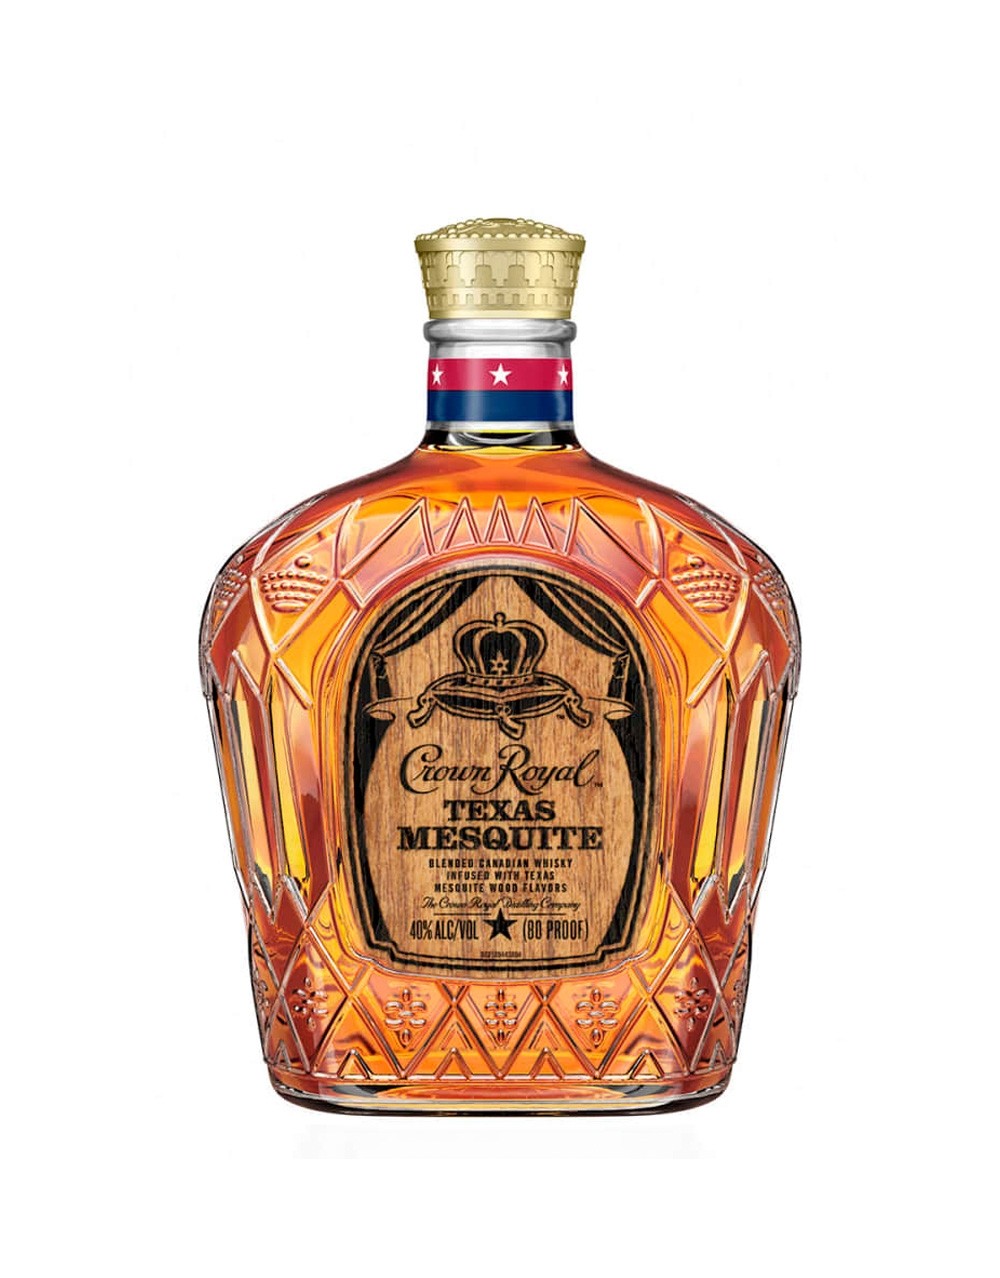 Crown Royal® Texas Mesquite | Buy Online or Send as a Gift